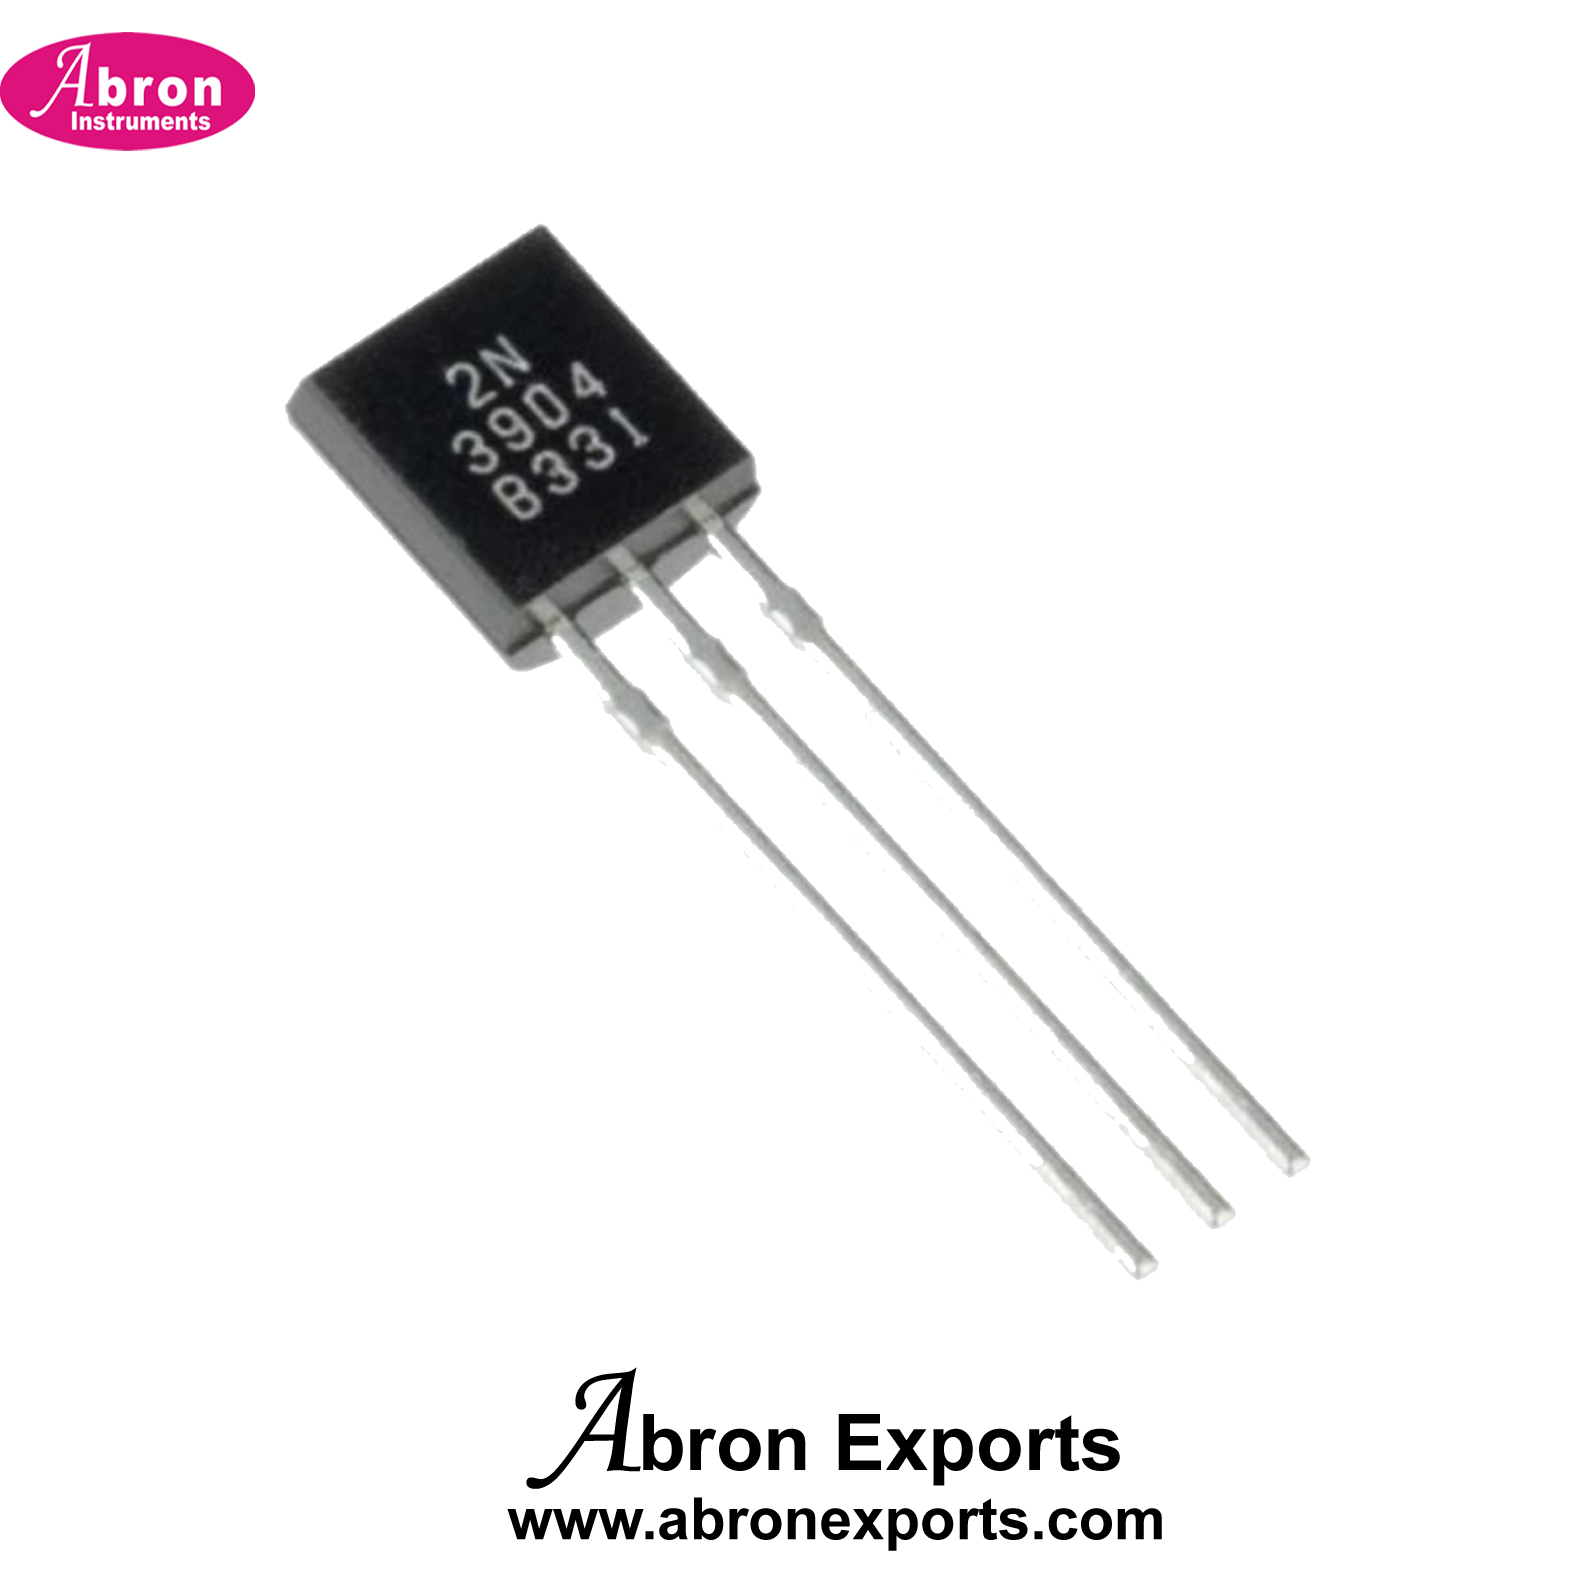 Electronic Component Transistor 2n3904 3 Legs 100pc Abron AE-1224TN239 